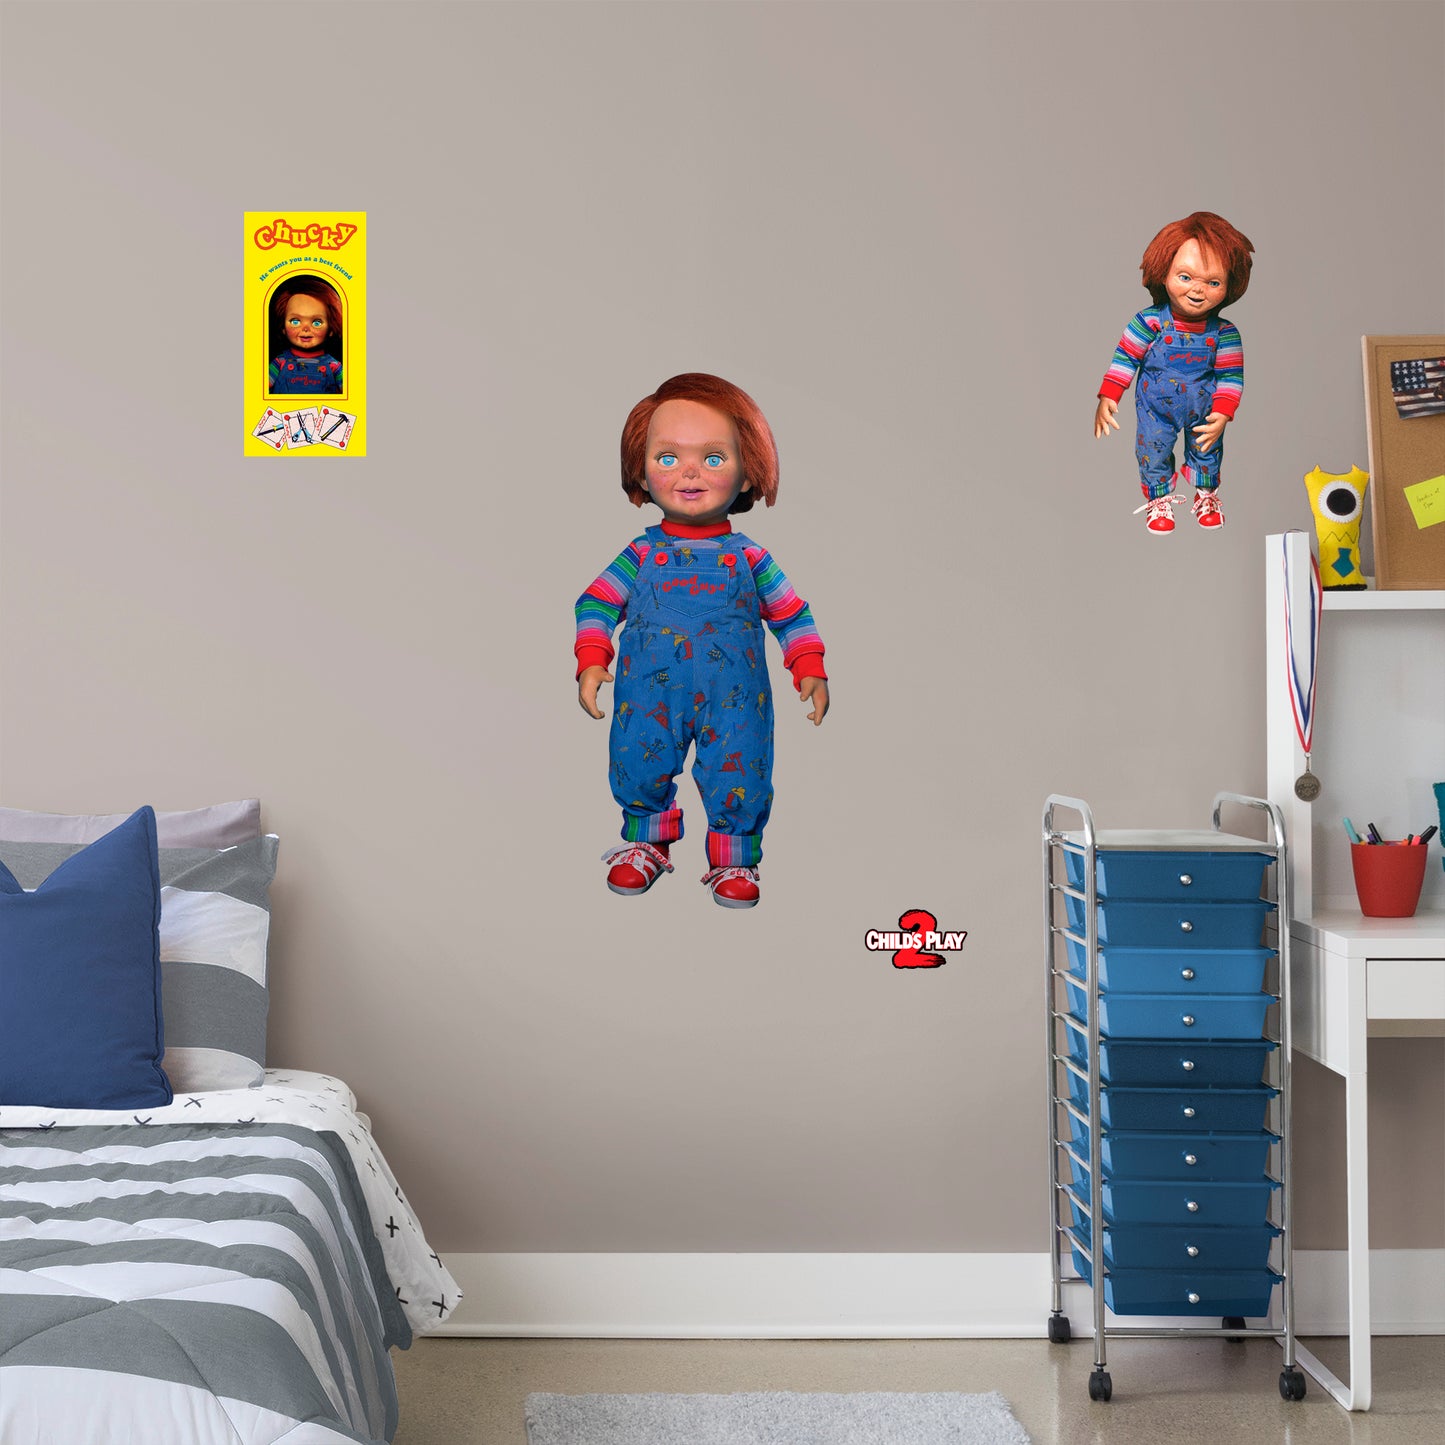 Chucky: Officially Licensed Removable Wall Decal